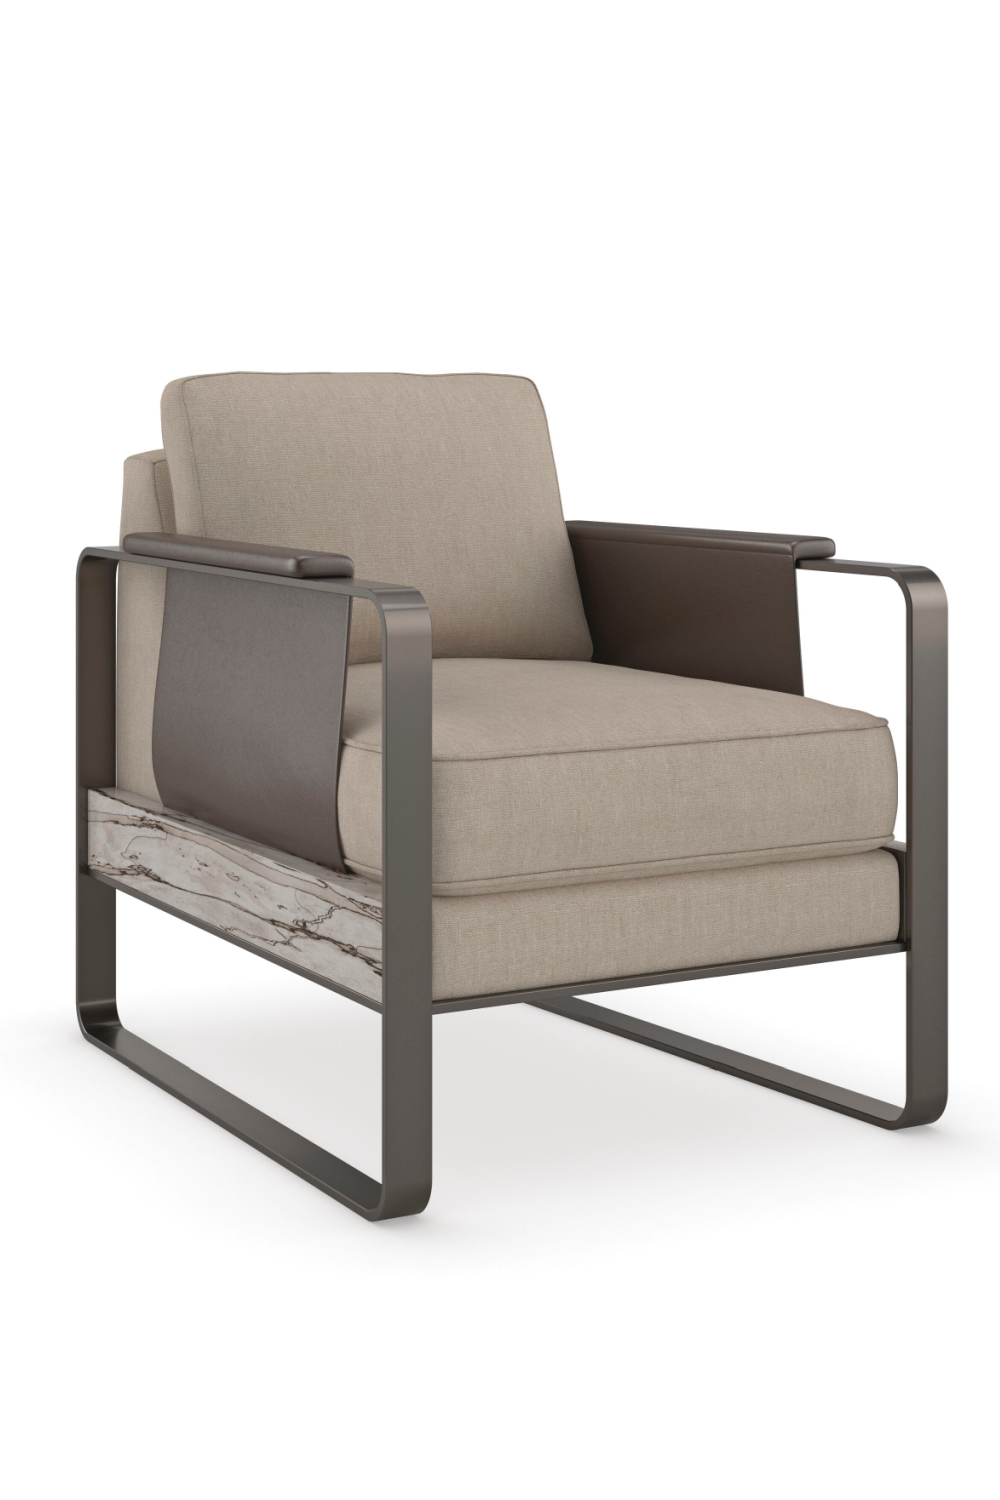 Industrial Style Lounge Chair | Caracole Arm In Arm | Oroa.com